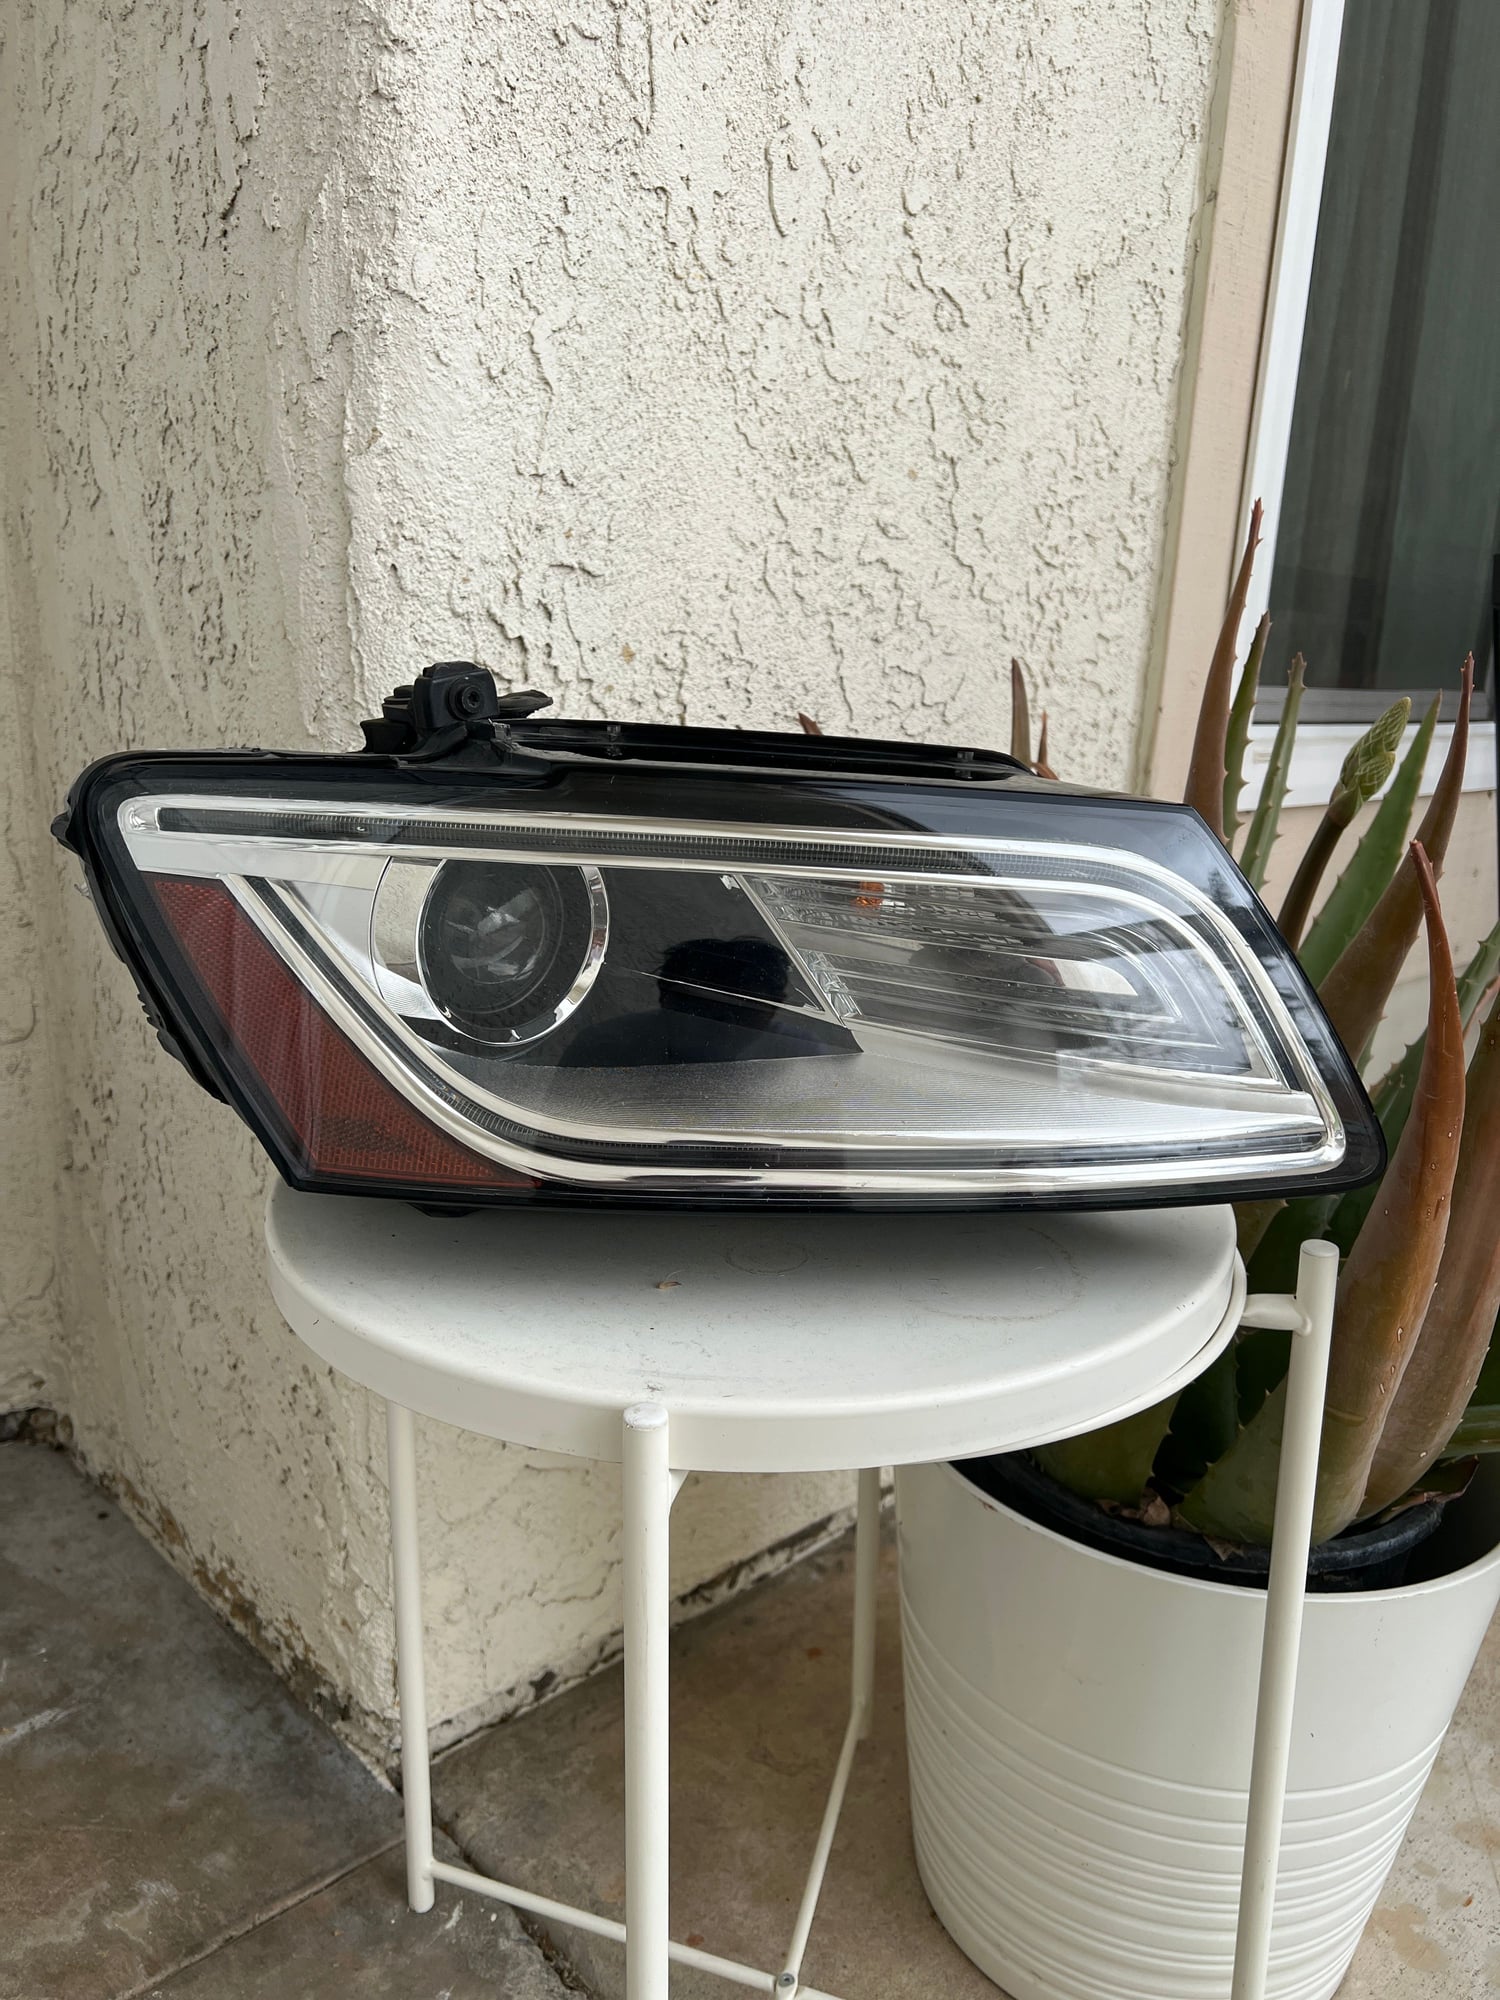 Exterior Body Parts - 2015 Audi Q5 headlight and Cargo Cover - Used - 2013 to 2017 Audi Q5 - Riverside, CA 92505, United States